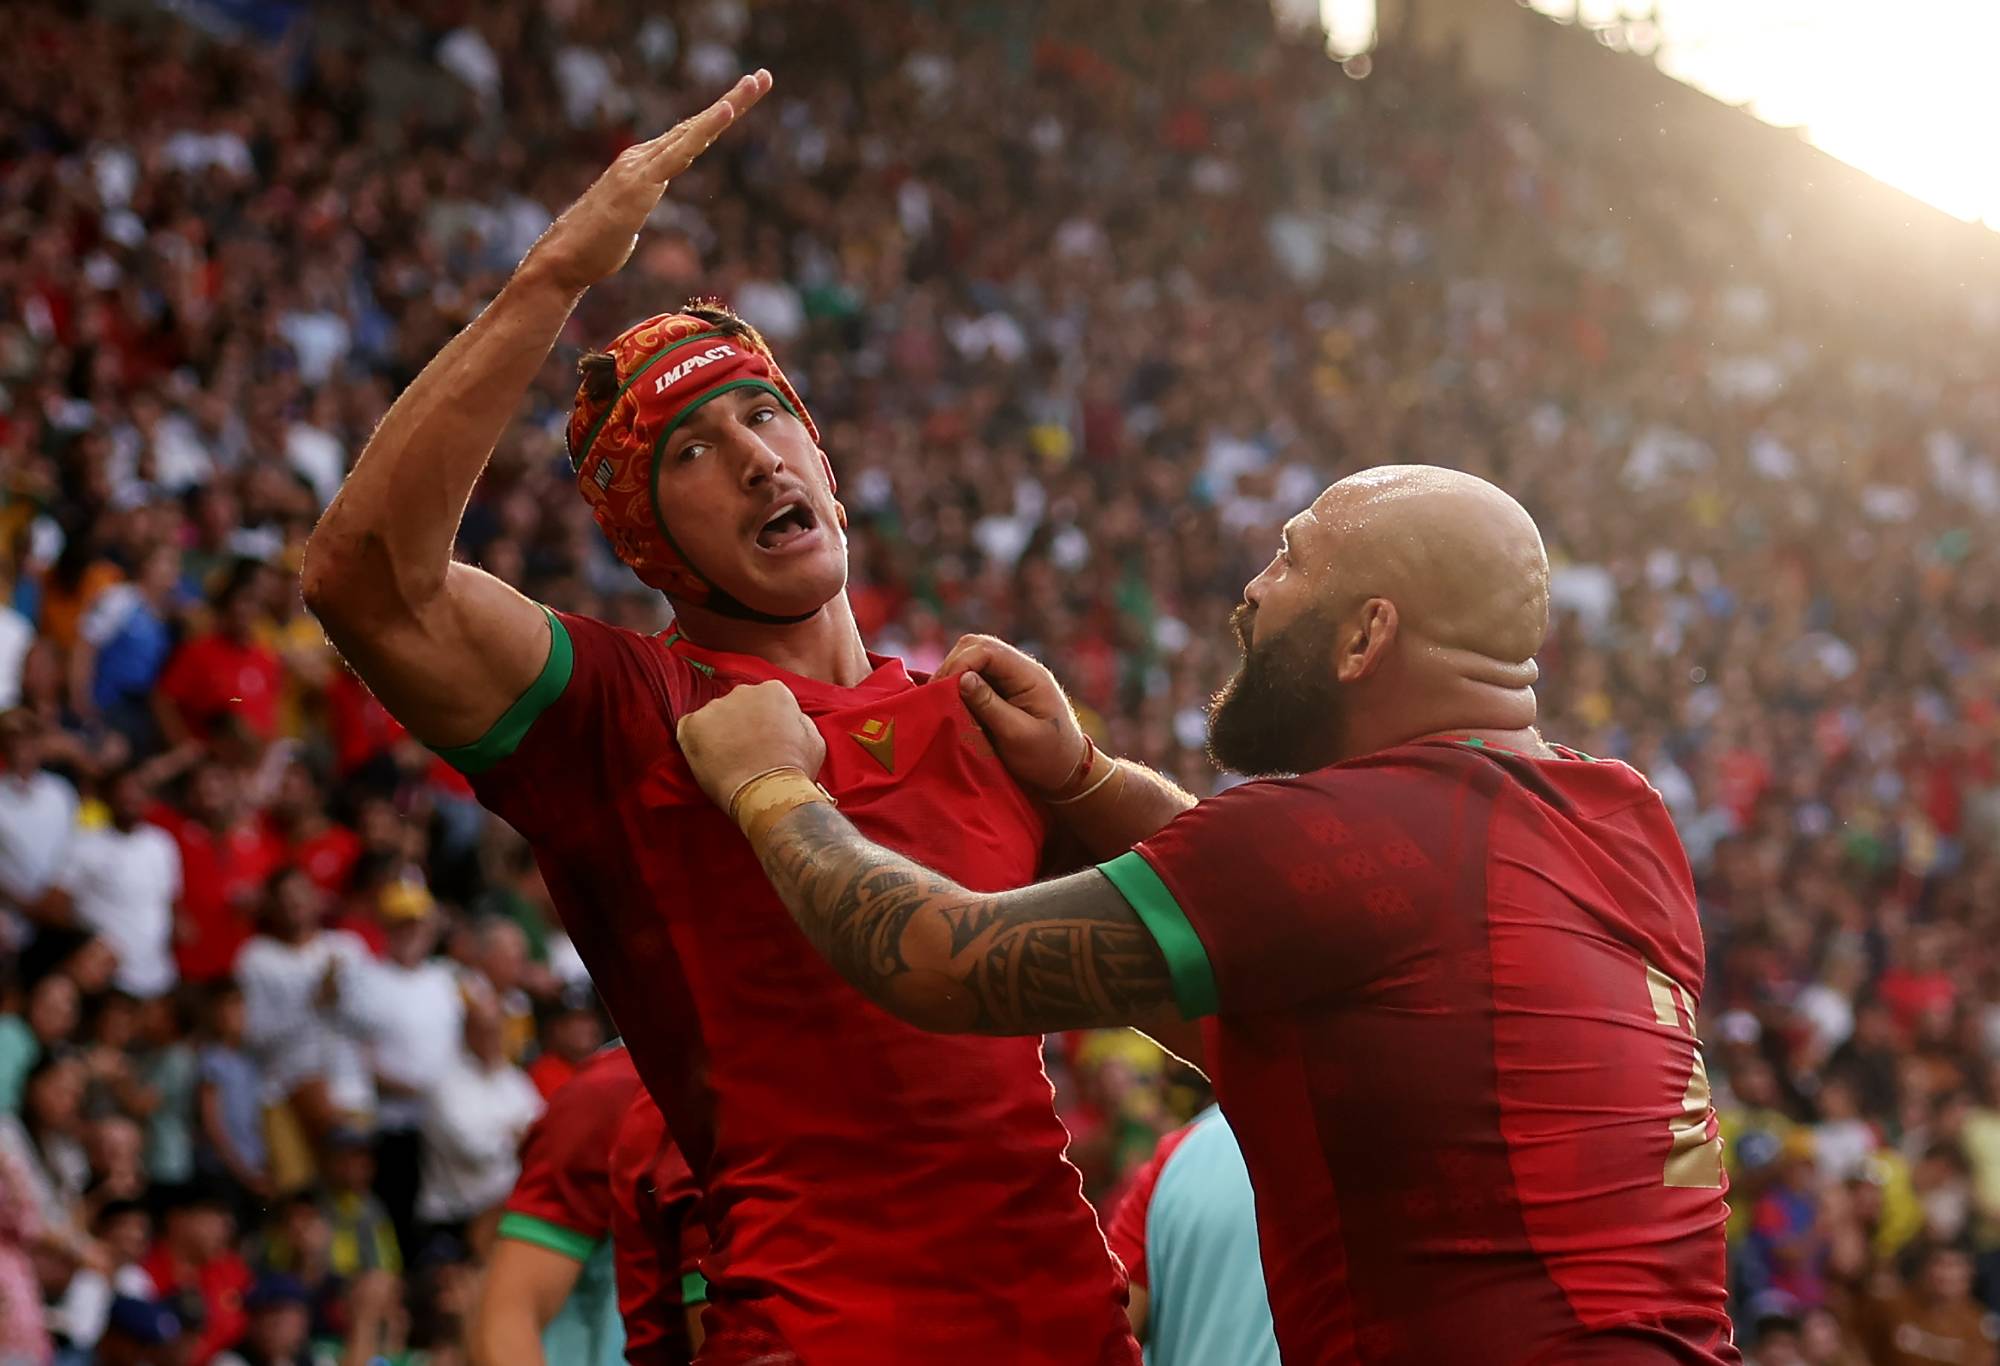 Nicolas Martins of Portugal reacts after scoring a disallowed try during the Rugby World Cup France 2023 match between Australia and Portugal at Stade Geoffroy-Guichard on October 01, 2023 in Saint-Etienne, France. (Photo by Julian Finney - World Rugby/World Rugby via Getty Images)